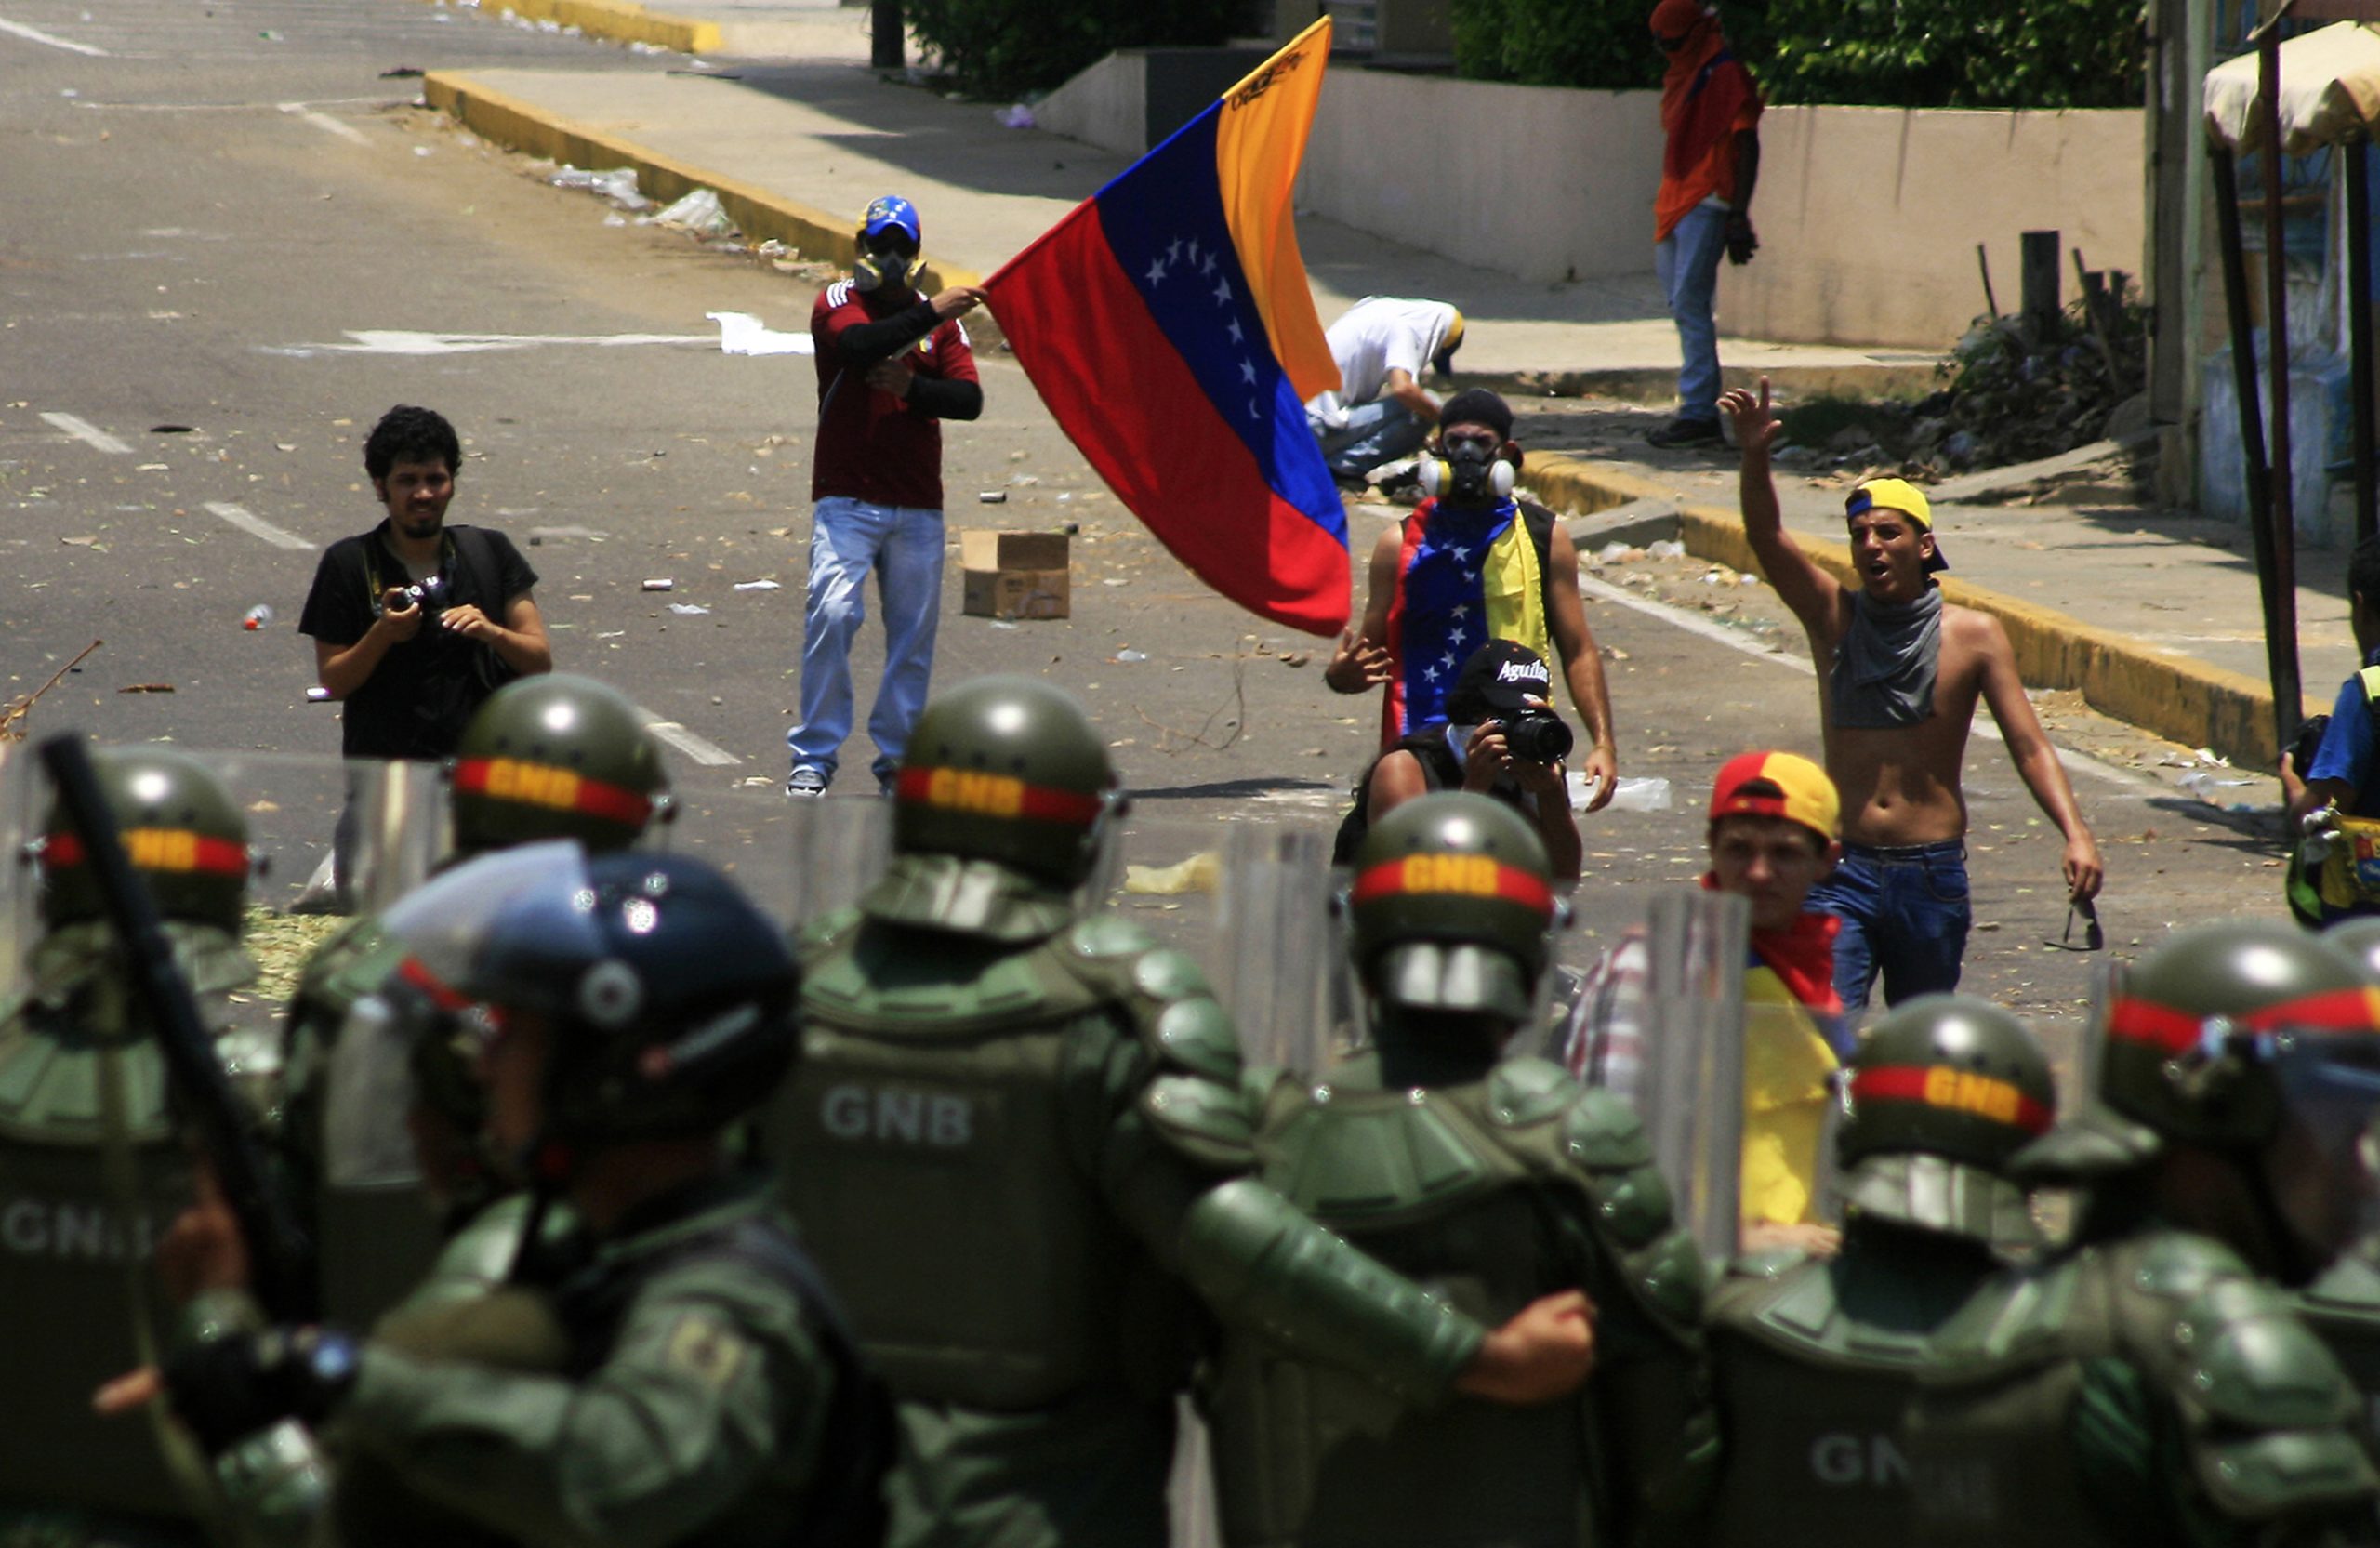 Protesters in Venezuela carry their country's flags and approach security forces